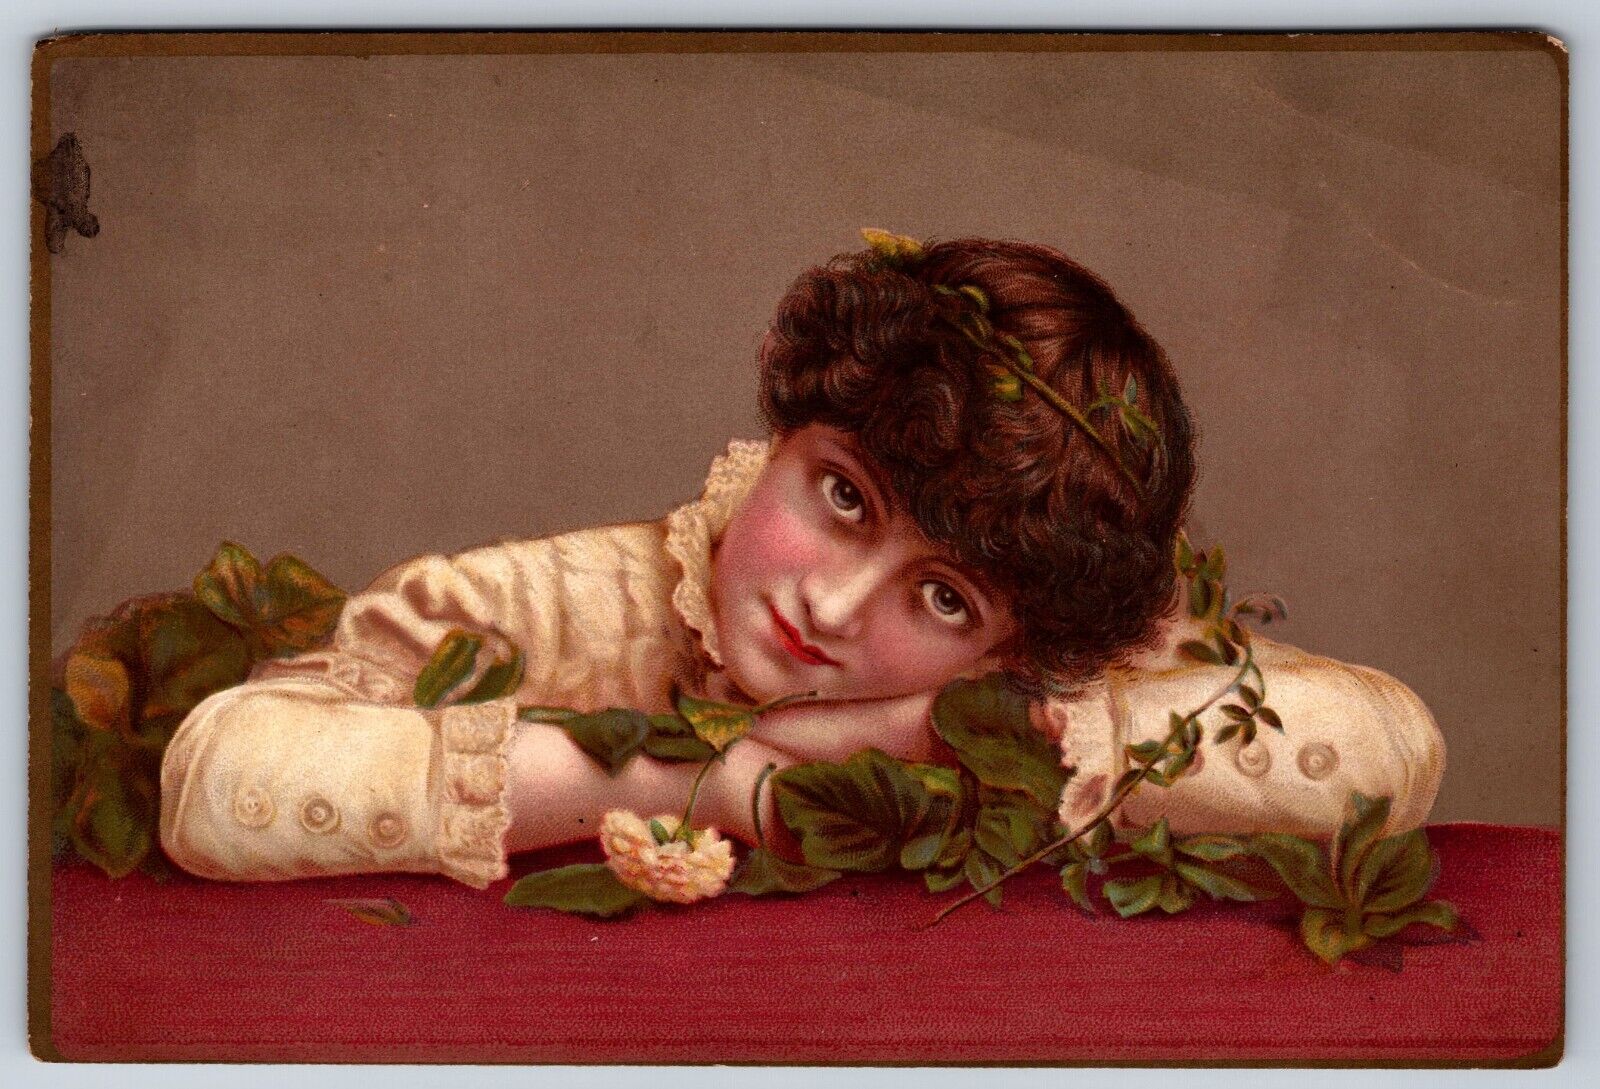 Victorian era trading card, girl with her head down on table with rose leaves